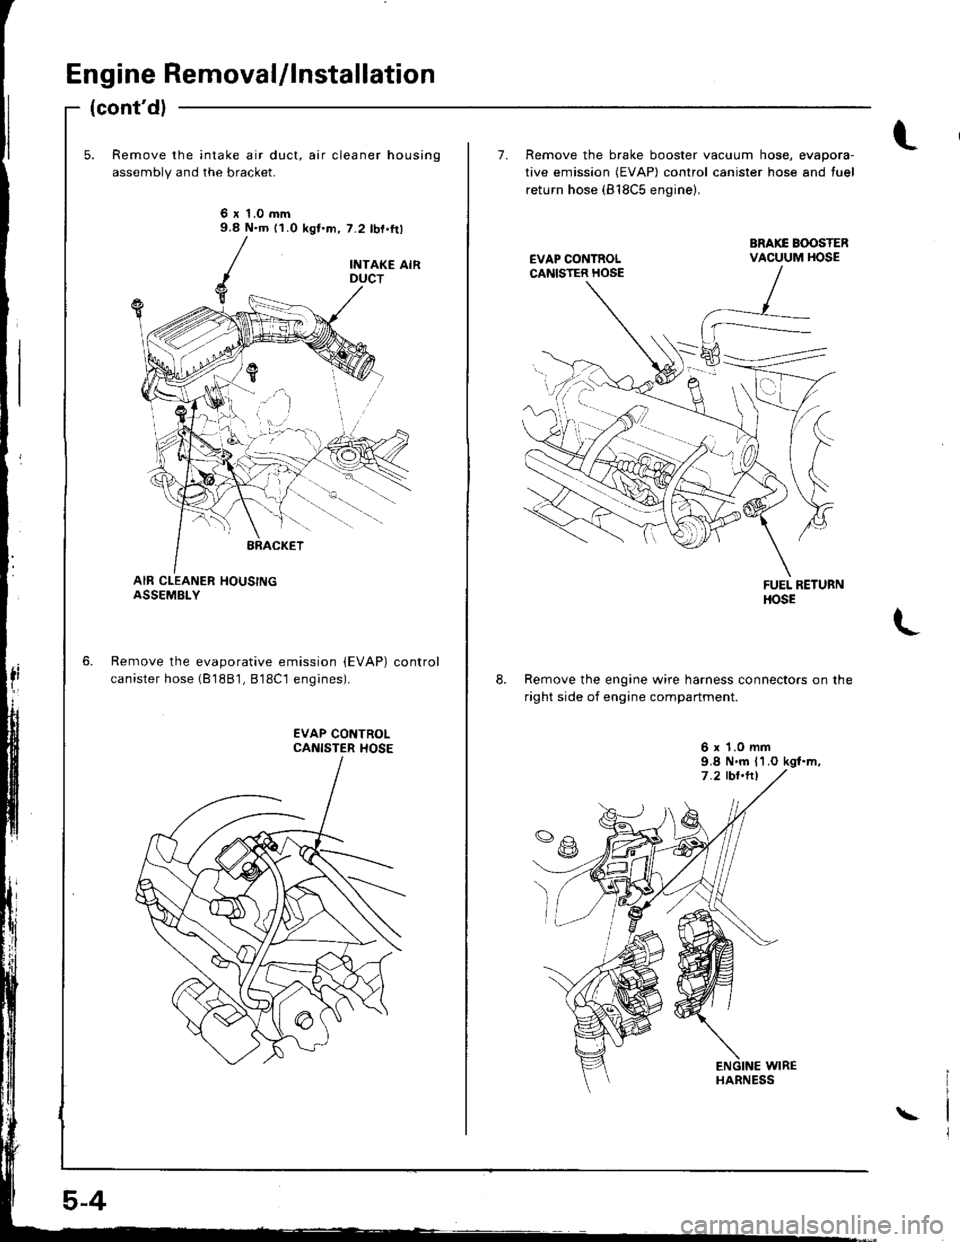 HONDA INTEGRA 1998 4.G Workshop Manual En gine Remova l/l nstal lation
(contdl
Remove the intake air duct, air cleaner housing
assembly and the bracket.
6 r t.0 mm9.8 N.m (1.0 kgt.m, 7.2 lbf.ft)
Remove the evaporative emission {EVAP)
can